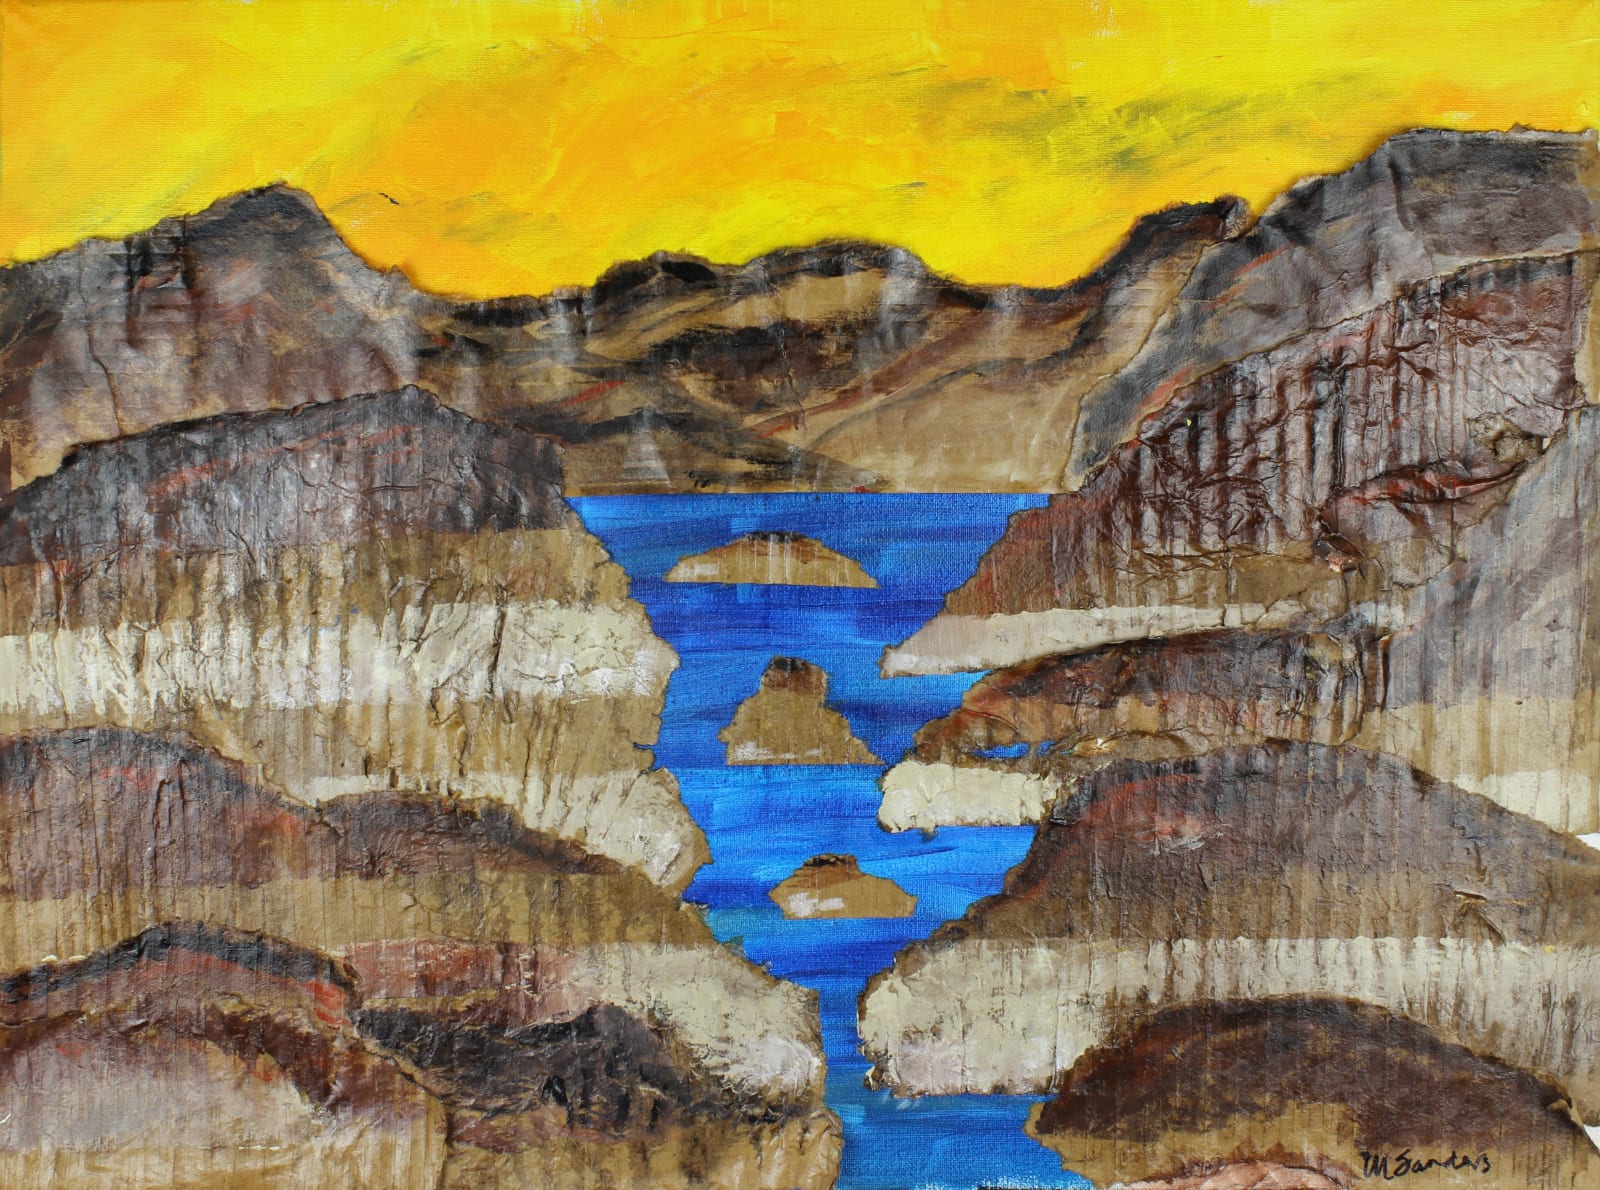 Adult Honorable Mention $50 MAGGIE SANDERS (ADULT) LAKE MEAD 2030 [72], 2021 Mixed media: acrylic, cardboard, and paper